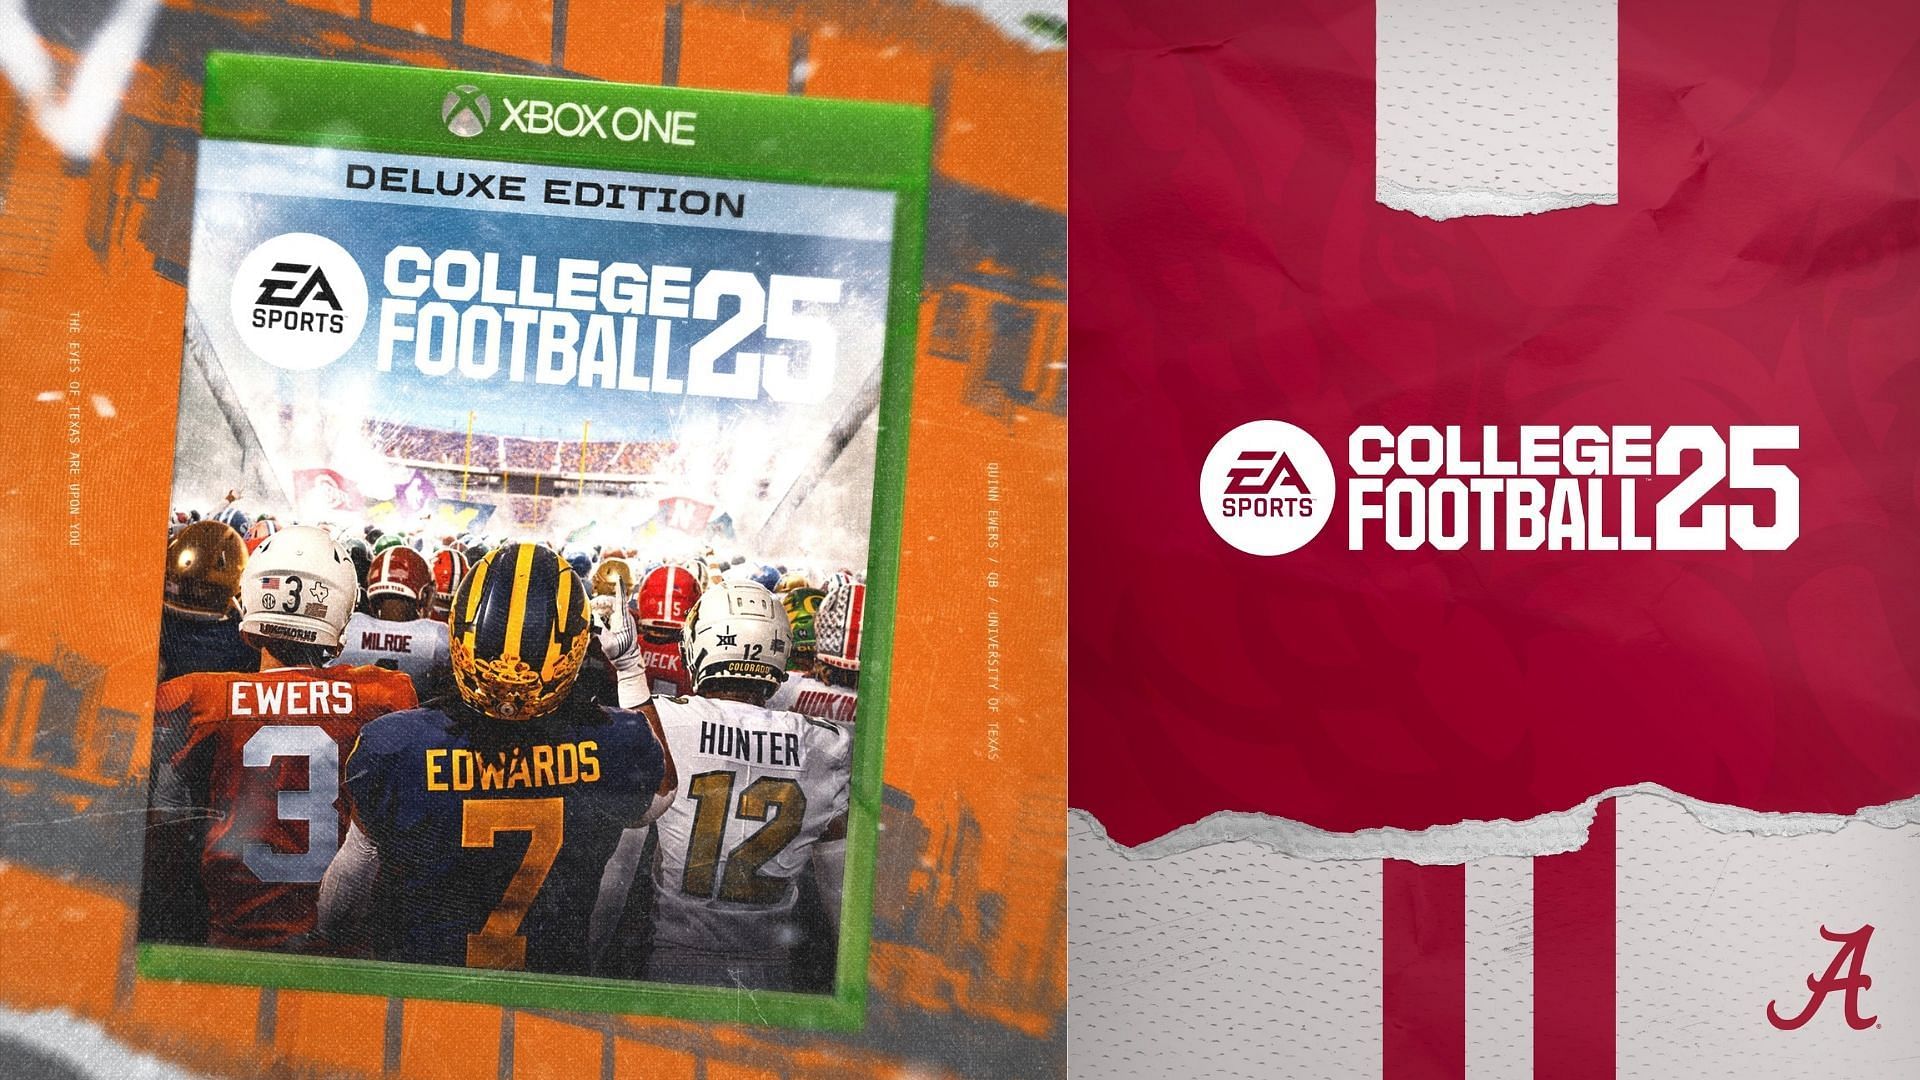 All you need to know about pre ordering College Football 25